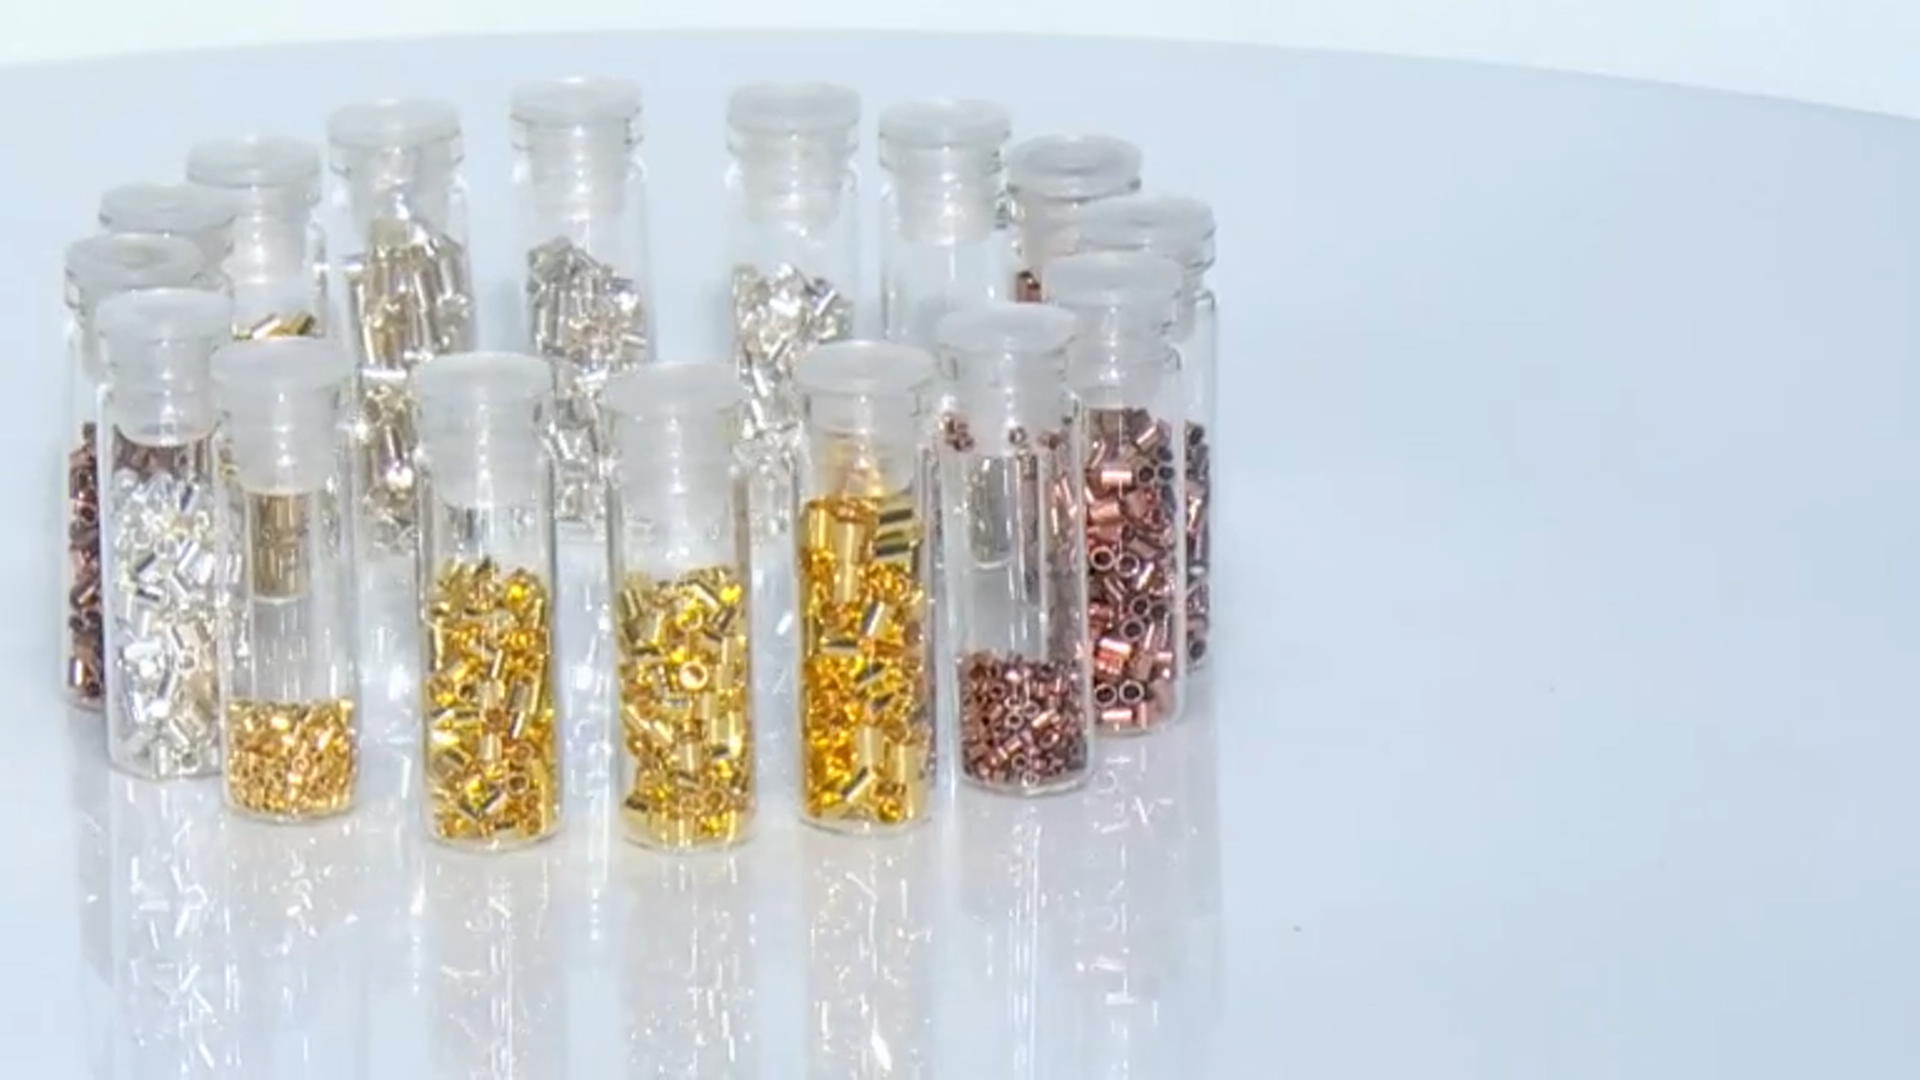 Crimp Tube Bead Kit in Appx 0.8mm, 1.3mm, 1.5mm, and 2mm in 4 Tones Appx 2,400 Pieces Total Video Thumbnail